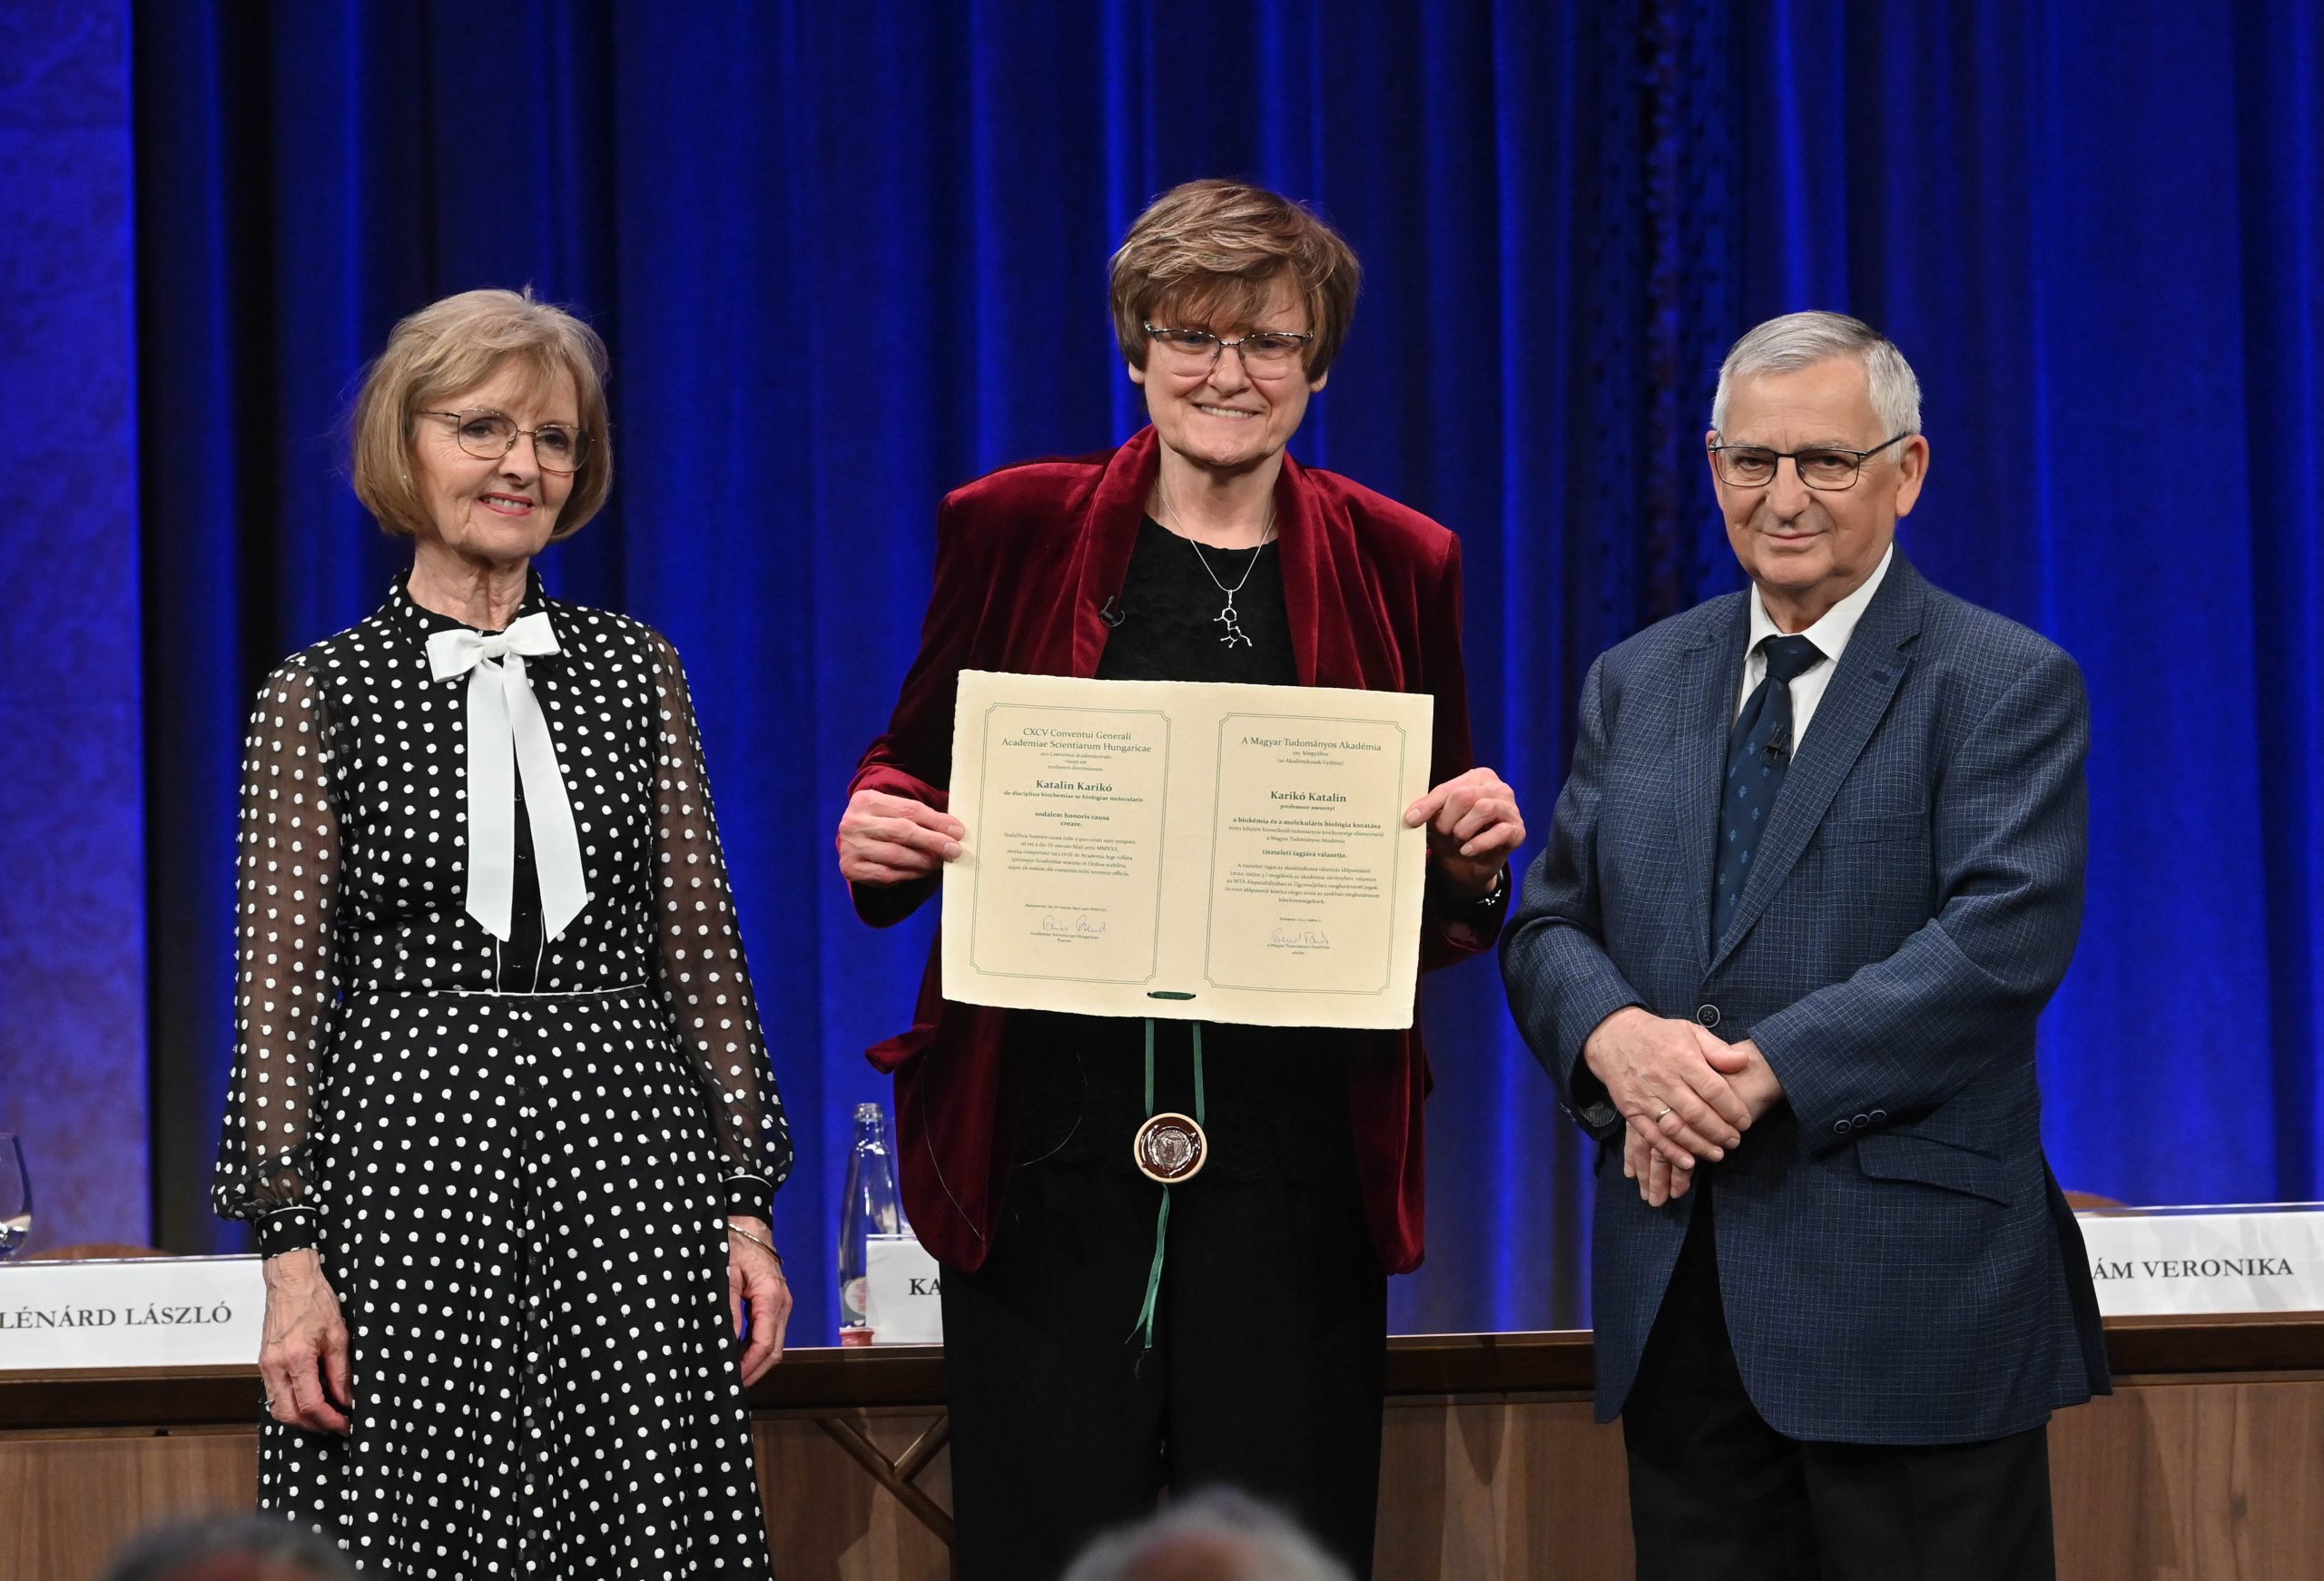 Katalin Karikó Delivers Inaugural Lecture as Honorary Member of the Hungarian Academy of Sciences